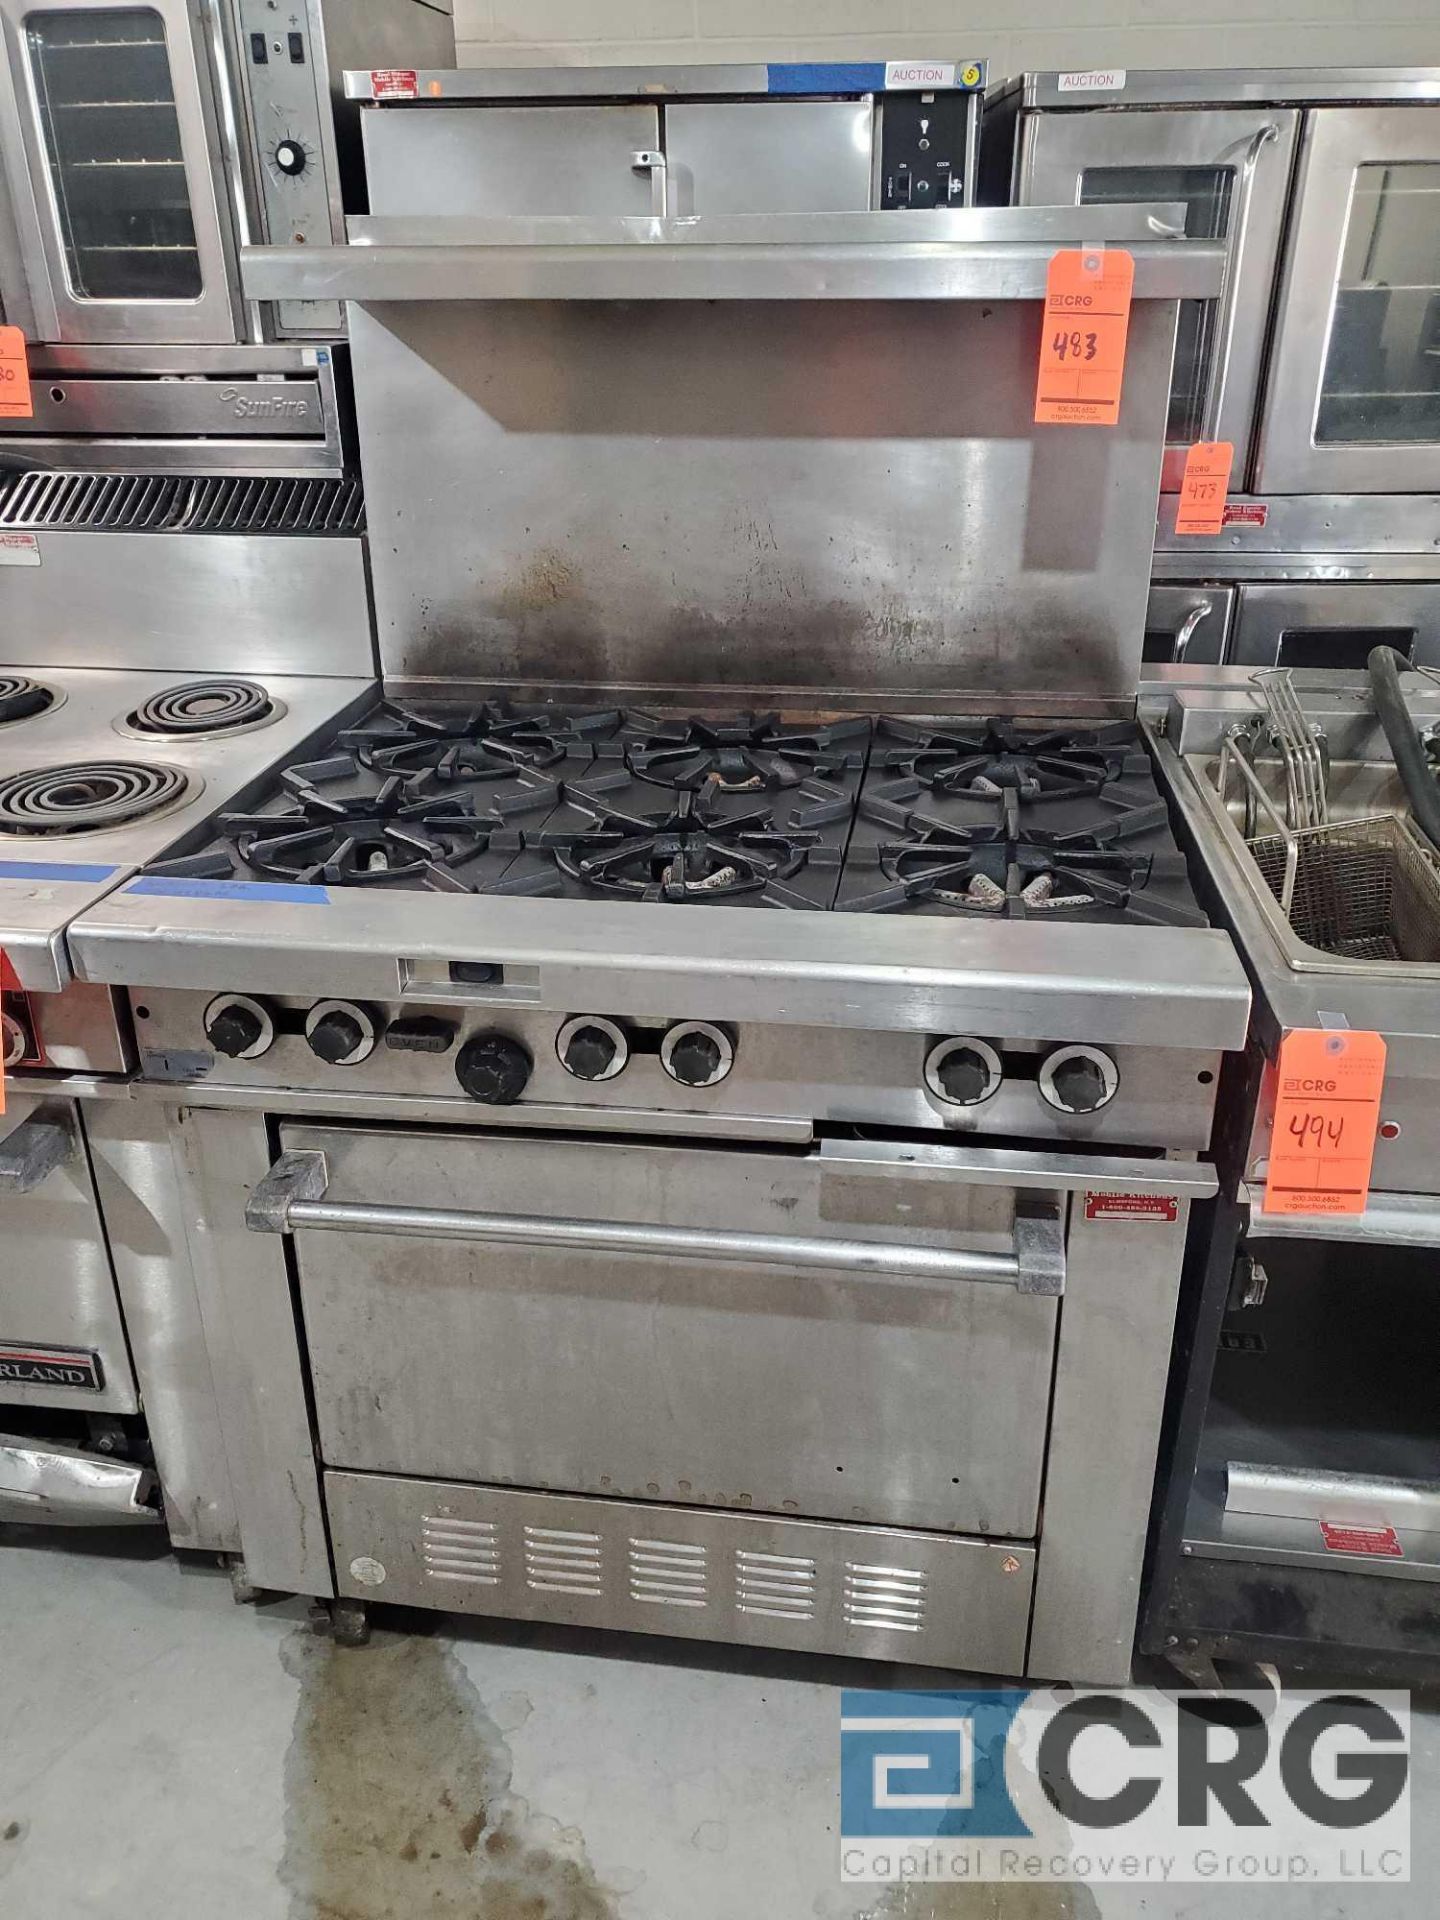 Propane Range with Convection Oven